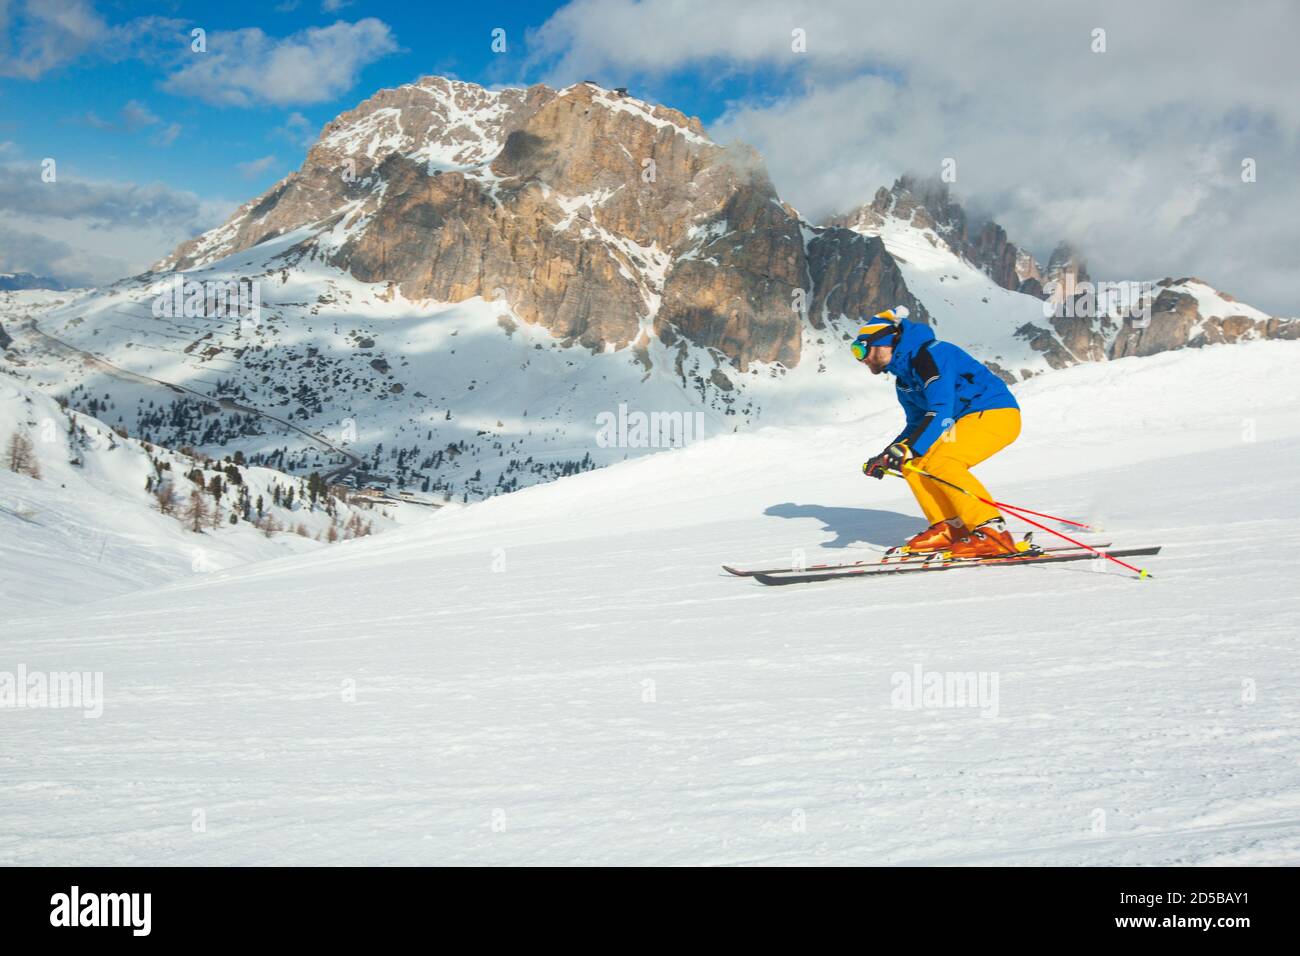 Male skier in blue and yellow clothes on slope with mountains in the background at Cortina d'Ampezzo Col Gallina Sella Ronda skiing resort area Dolomi Stock Photo